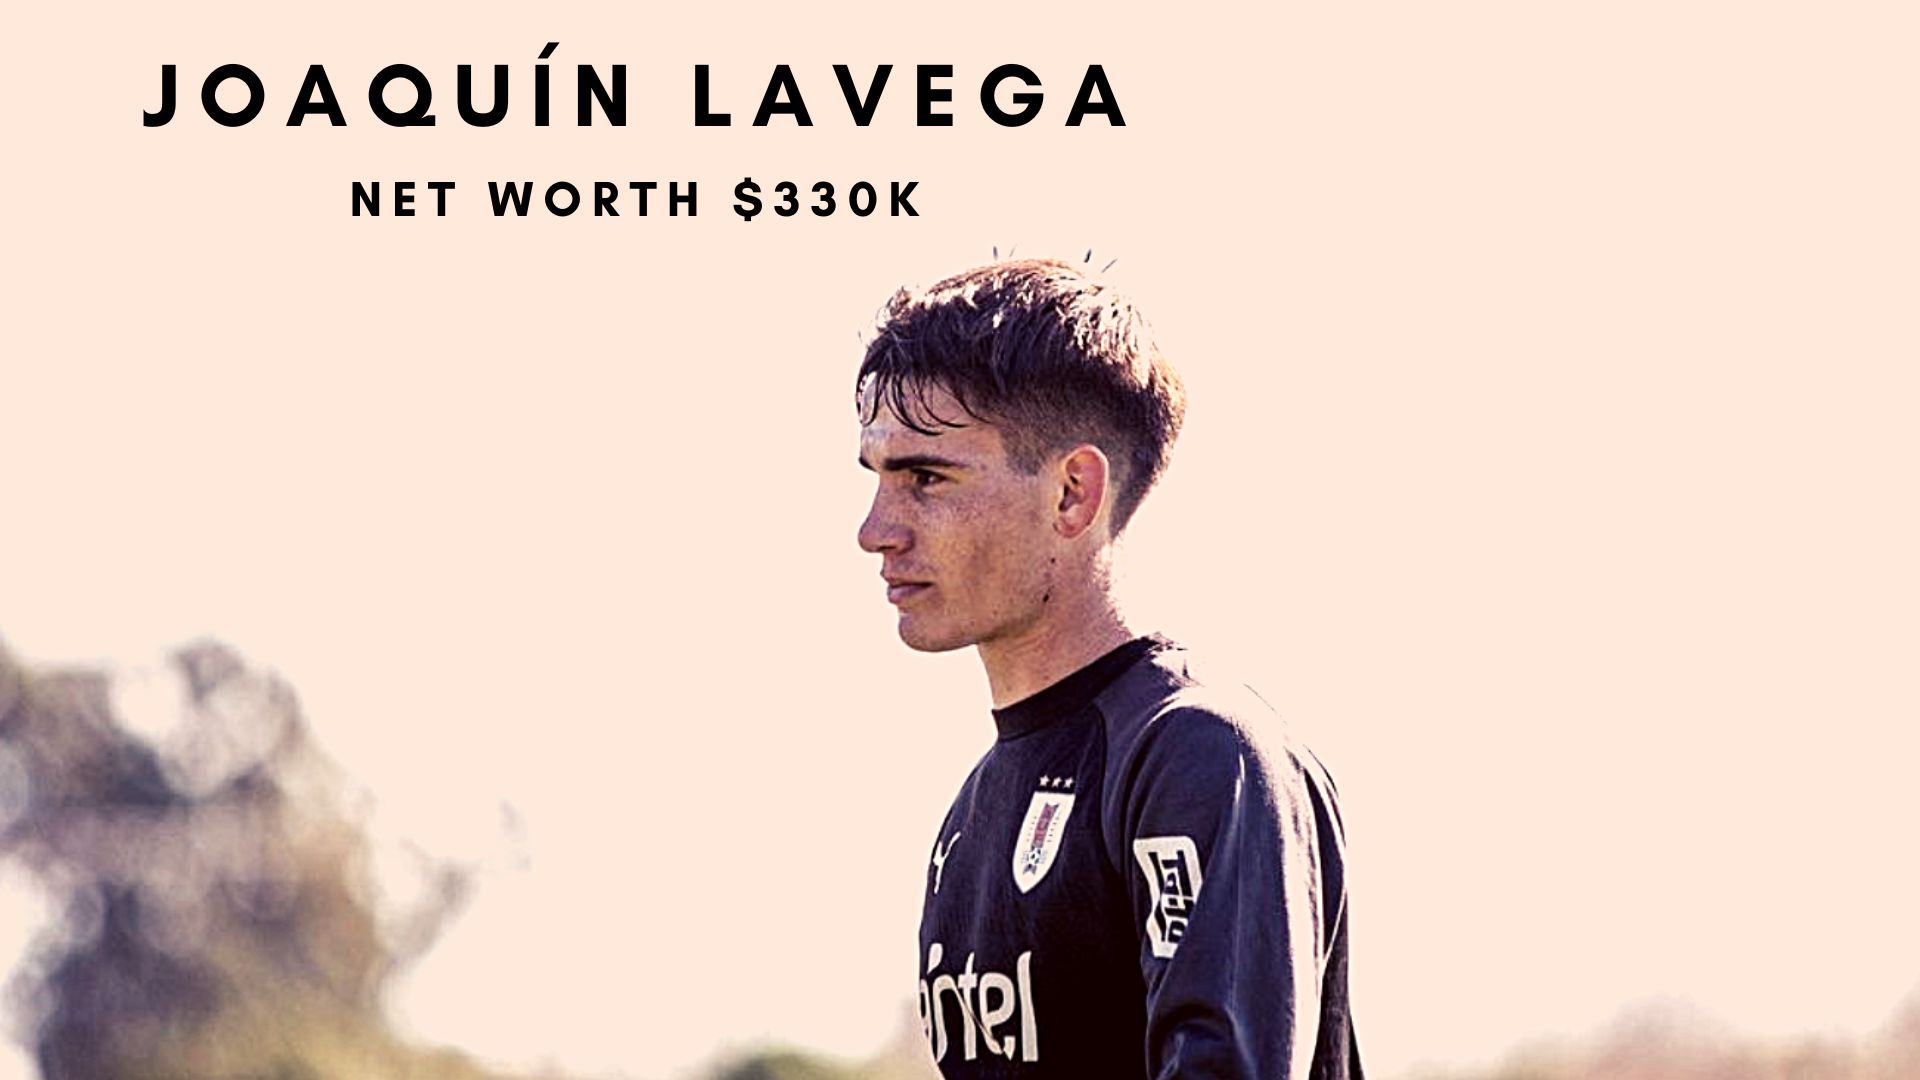 Joaquín Lavega is a product of River plate Montevideo’s youth academy and currently plays for the reserve team of the club. (Credits: @jlavega19 Instagram)